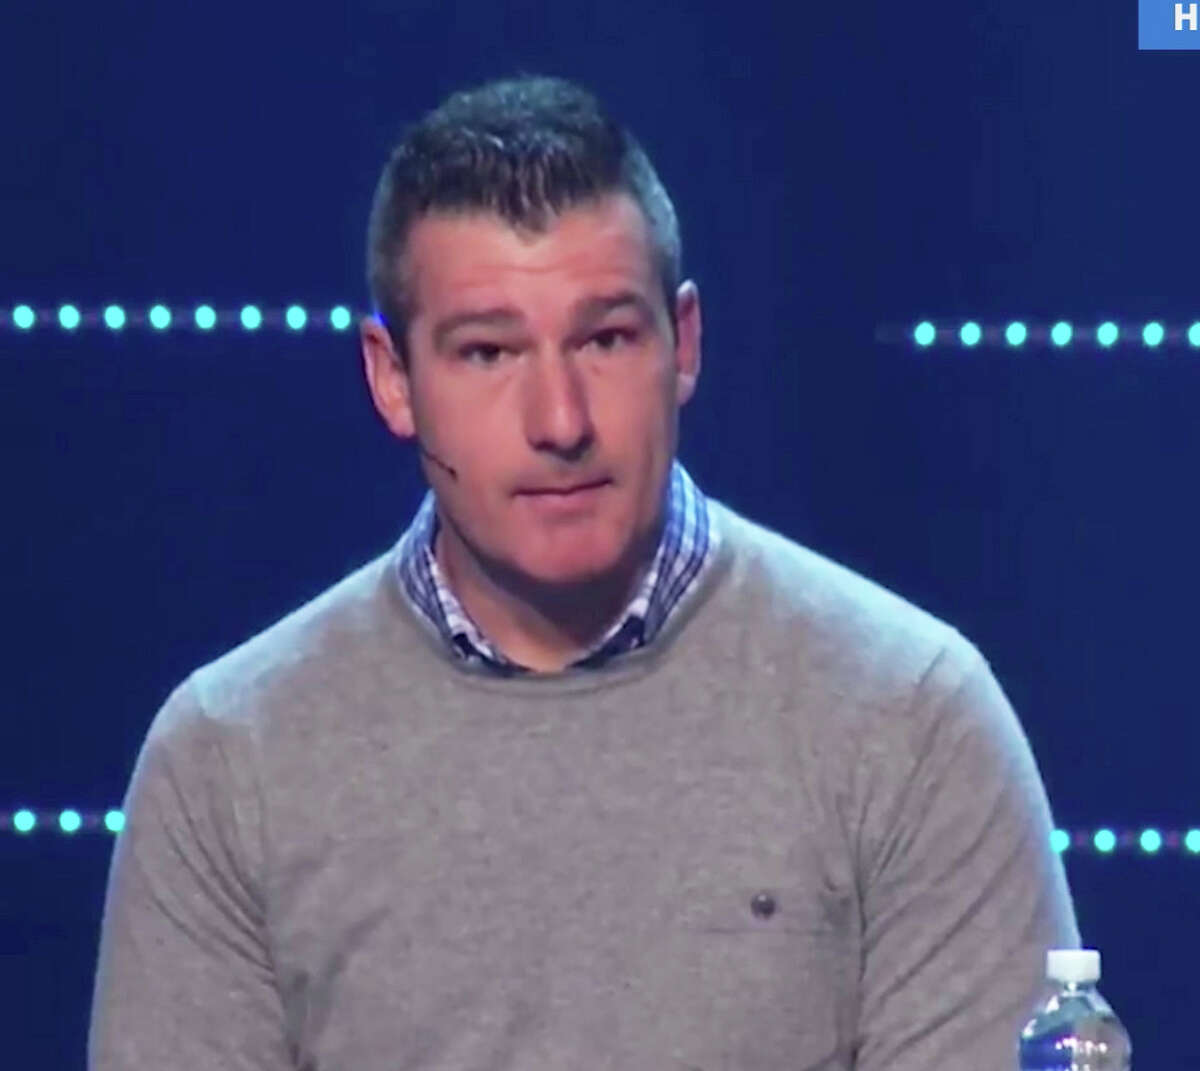 Andy Savage, a pastor at a Memphis megachurch, received a standing ovation after apologizing to a woman who said he assaulted her when she was a teenager.